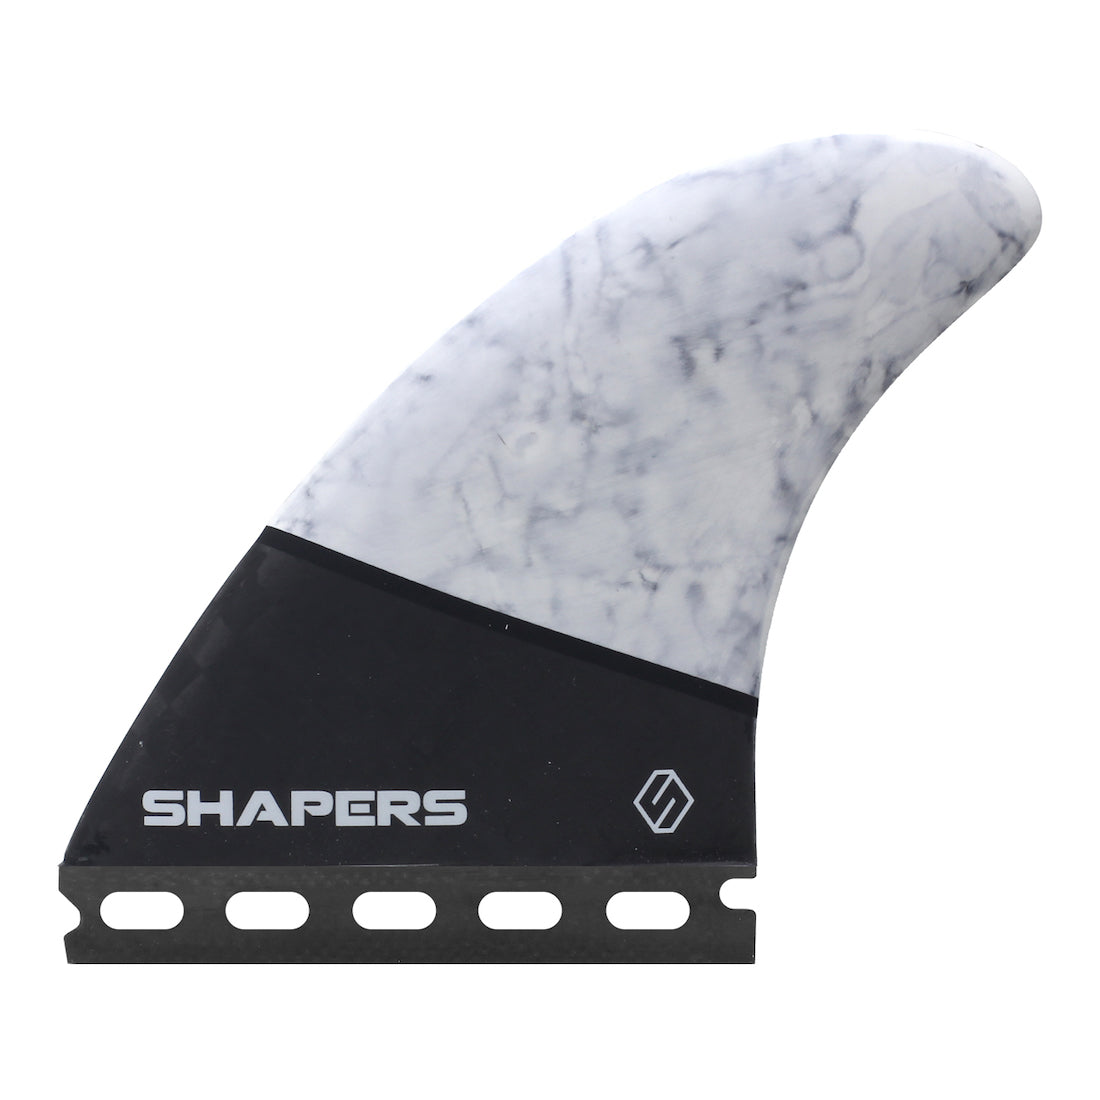 Shapers Fins - Carbon Flare Pivot (Futures) - Marble - Small